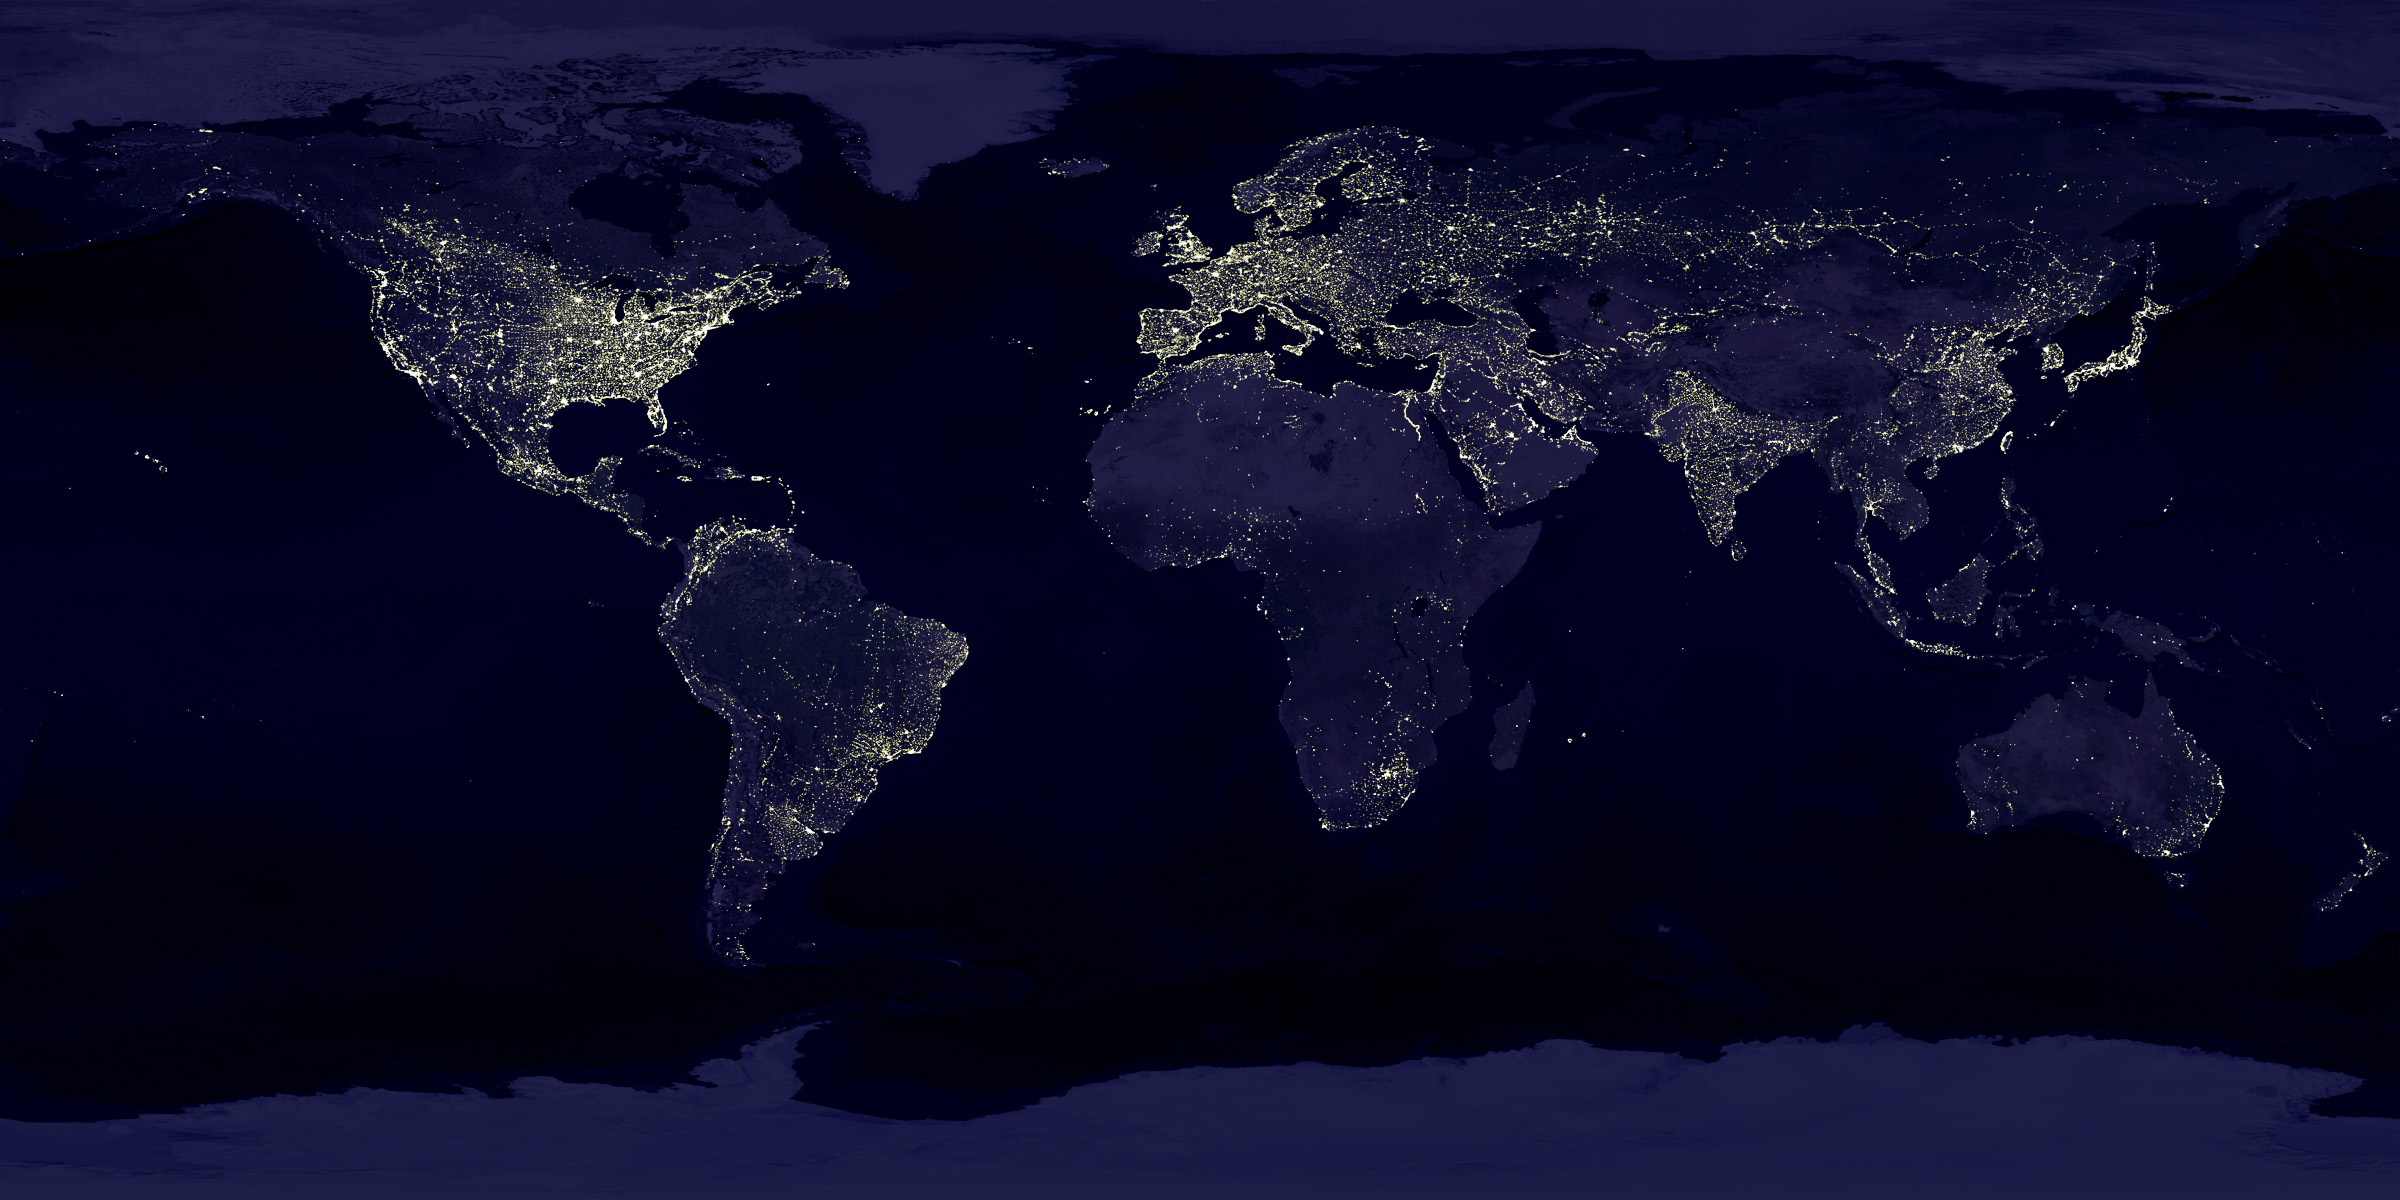 The Earth at Night.  Image from: http://eoimages.gsfc.nasa.gov/images/ imagerecords/55000/55167/earth_lights_lrg.jpg, last accessed 4/23/16.